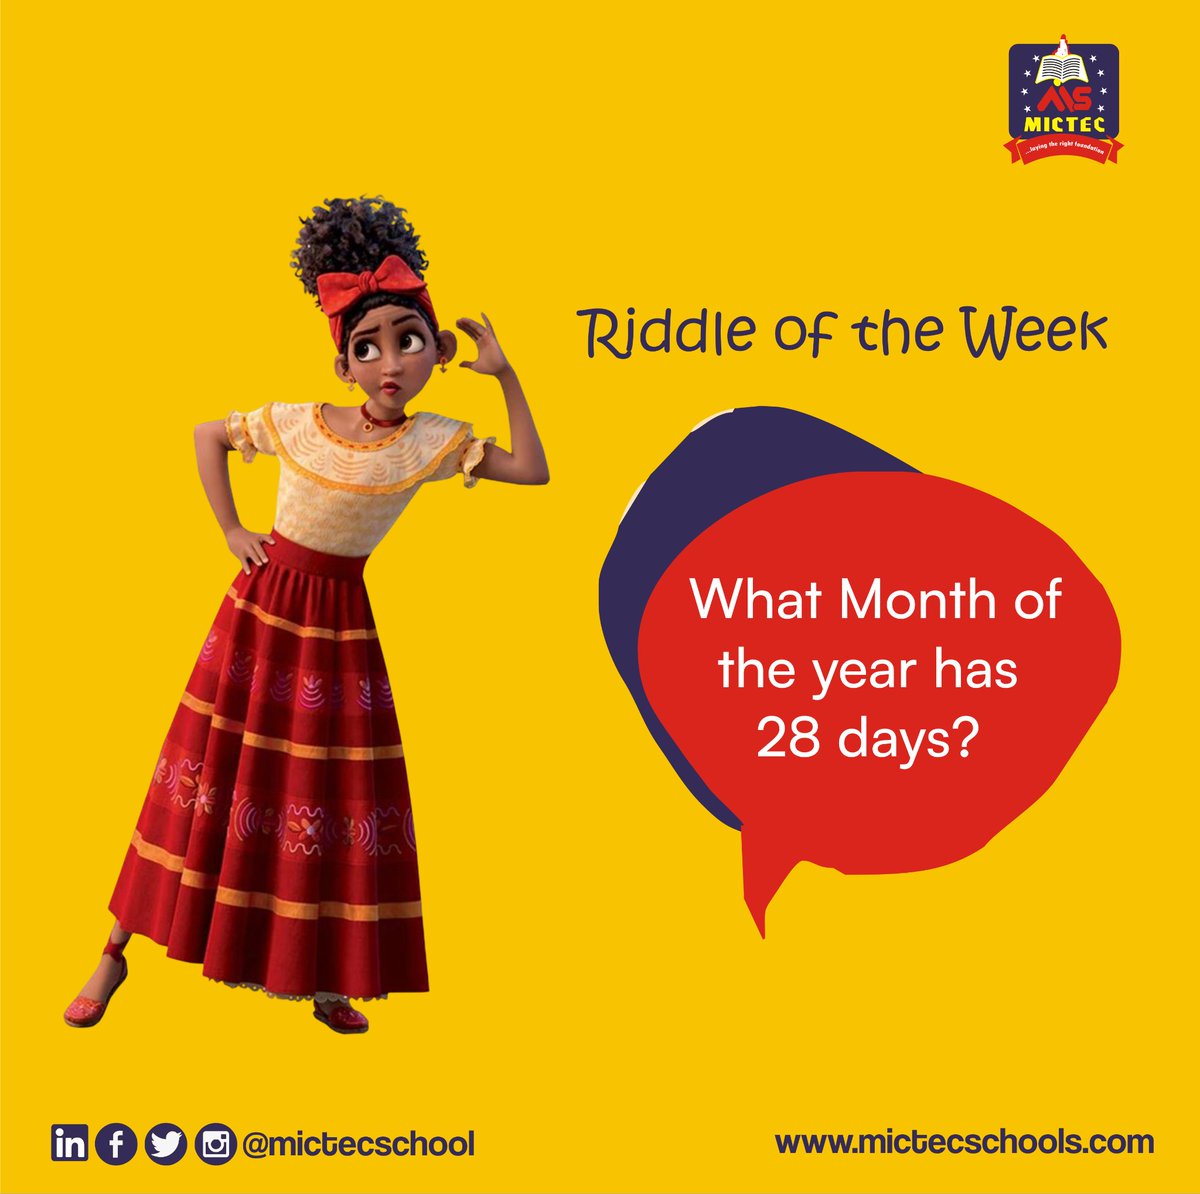 Riddle of the Week
Feel free to leave your answers at the comment section.
Thank you
#Mictecinternationalschools #Mictec #internationalschools
#schools #international #Books #Mictecinternationalschools #Ogudu #educationaltools
#education #exam #backtoschool #schoolstyle #Math